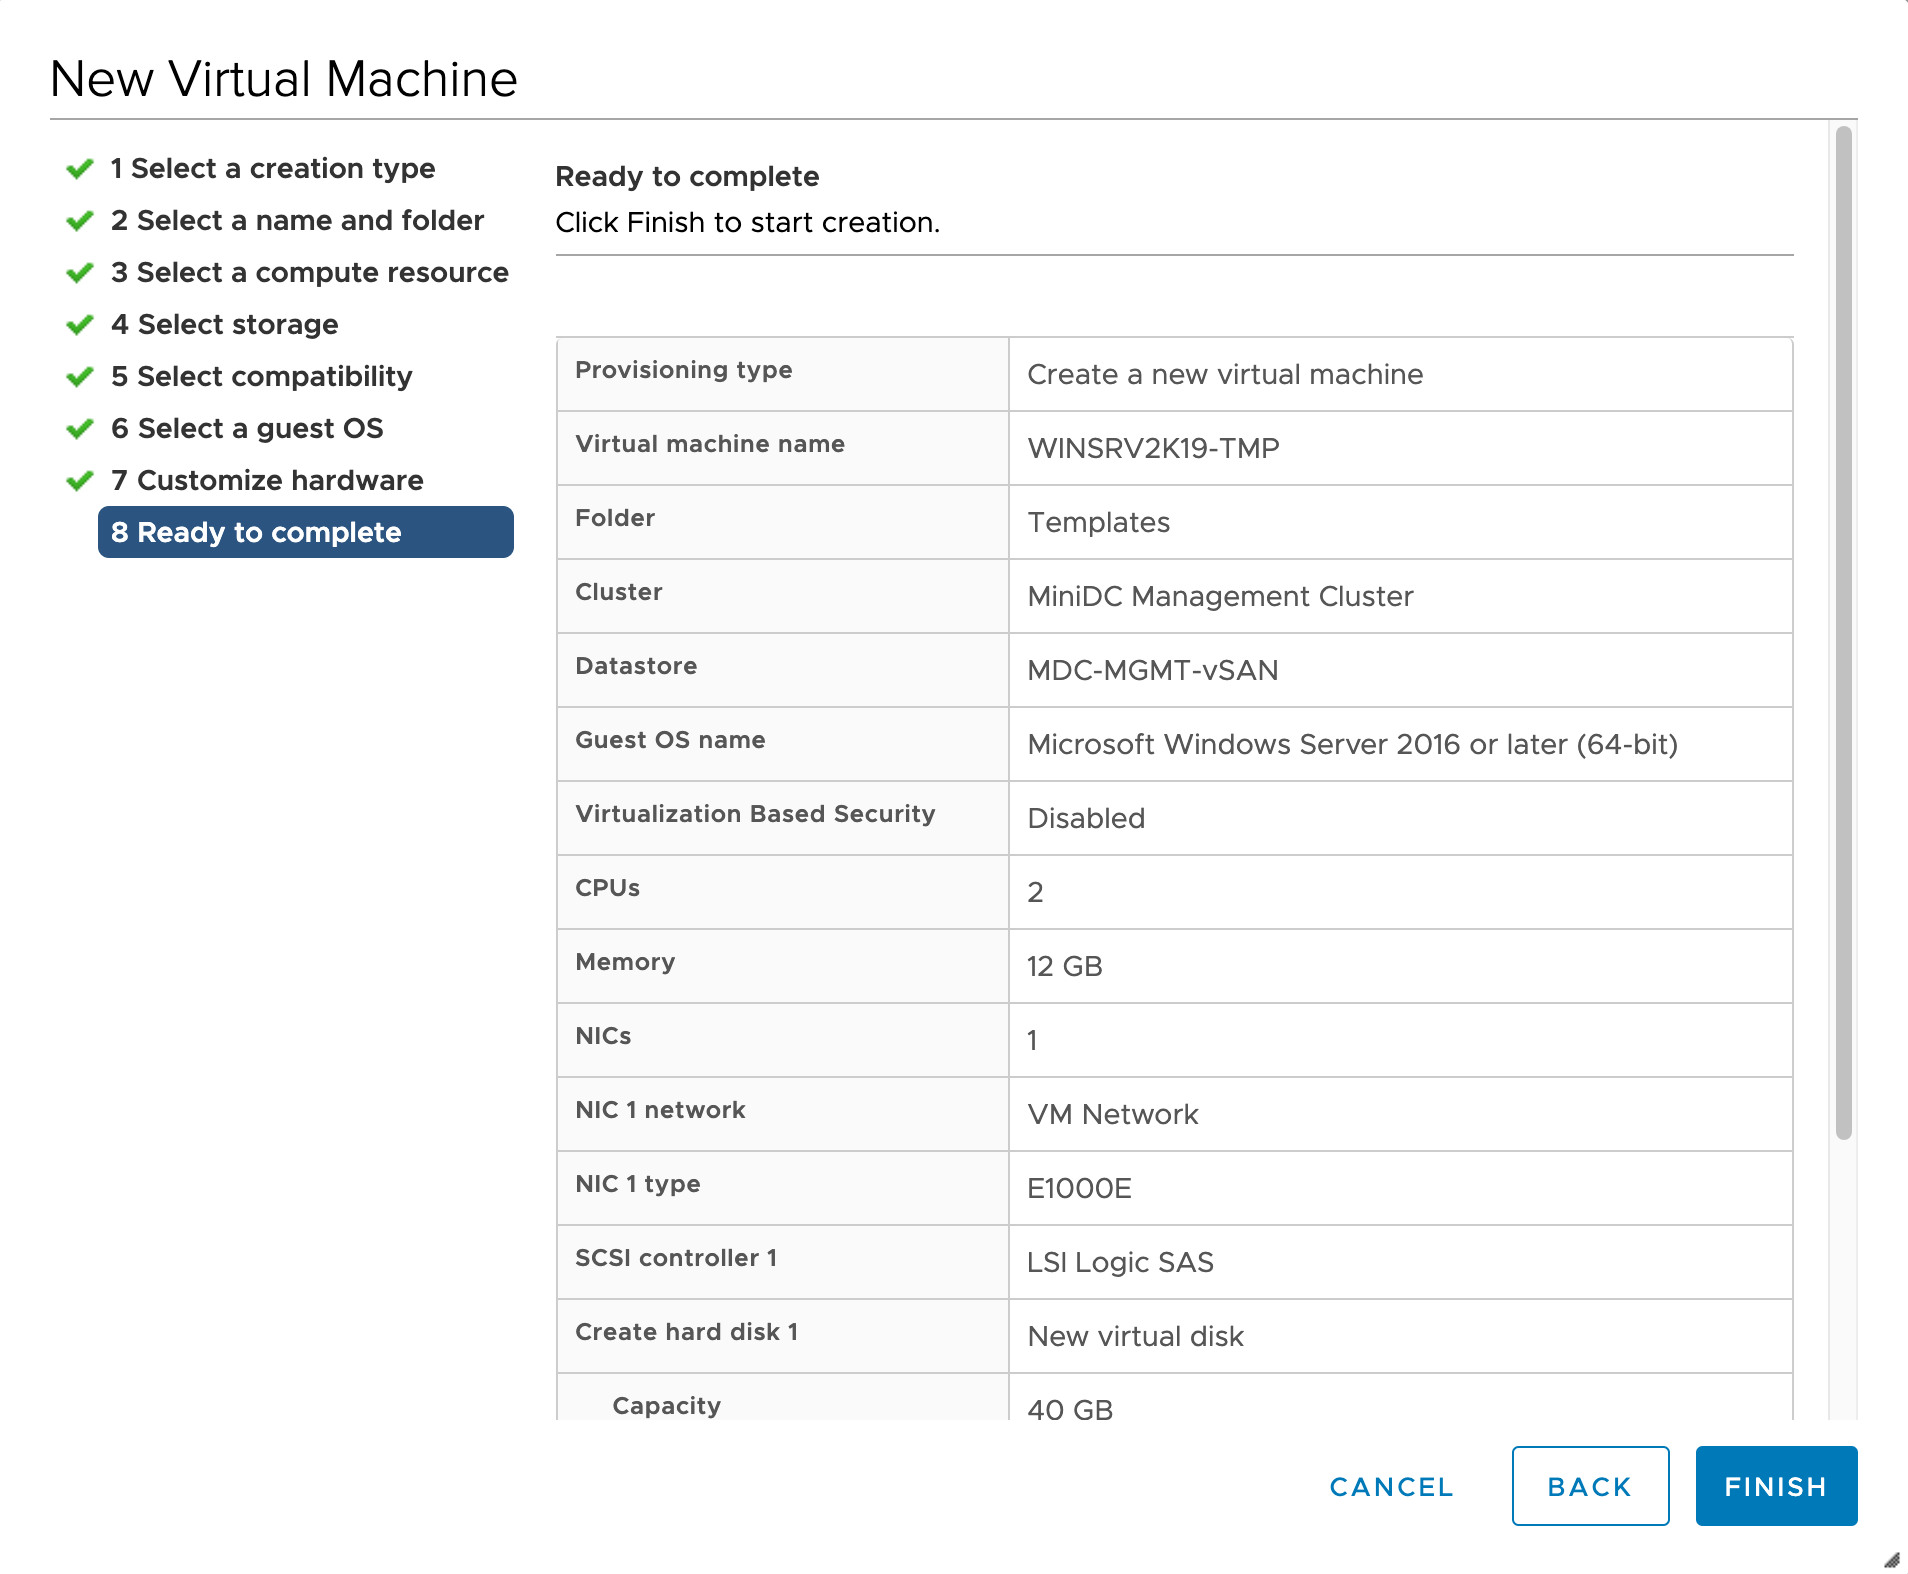 Screenshot of the "Ready to complete" section of the New Virtual Machine creation pane.